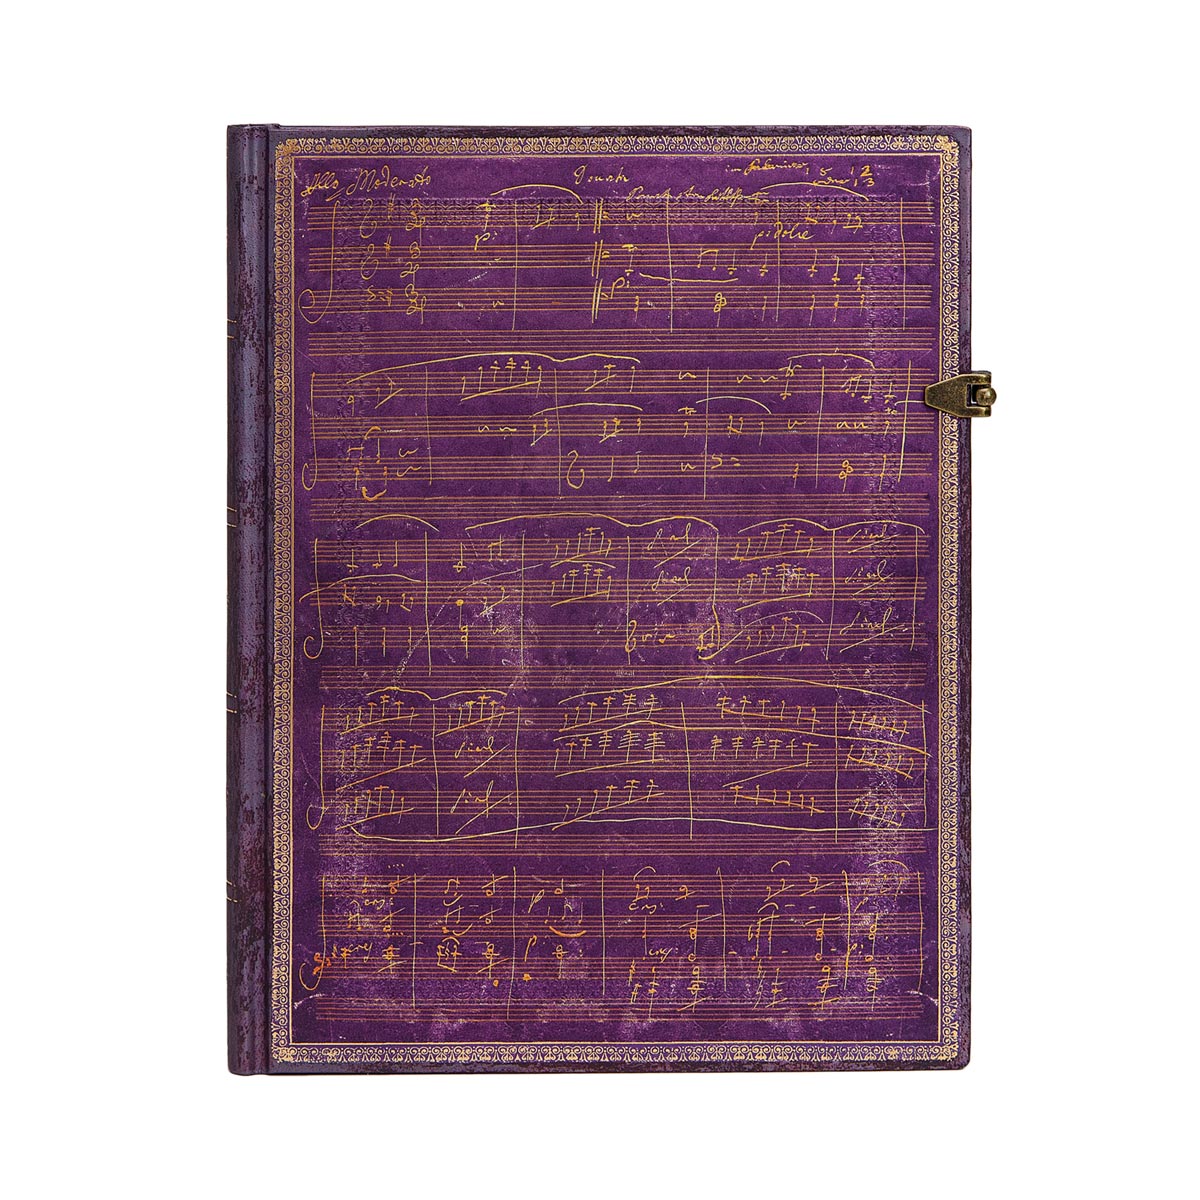 Paperblanks Beethoven's 250th